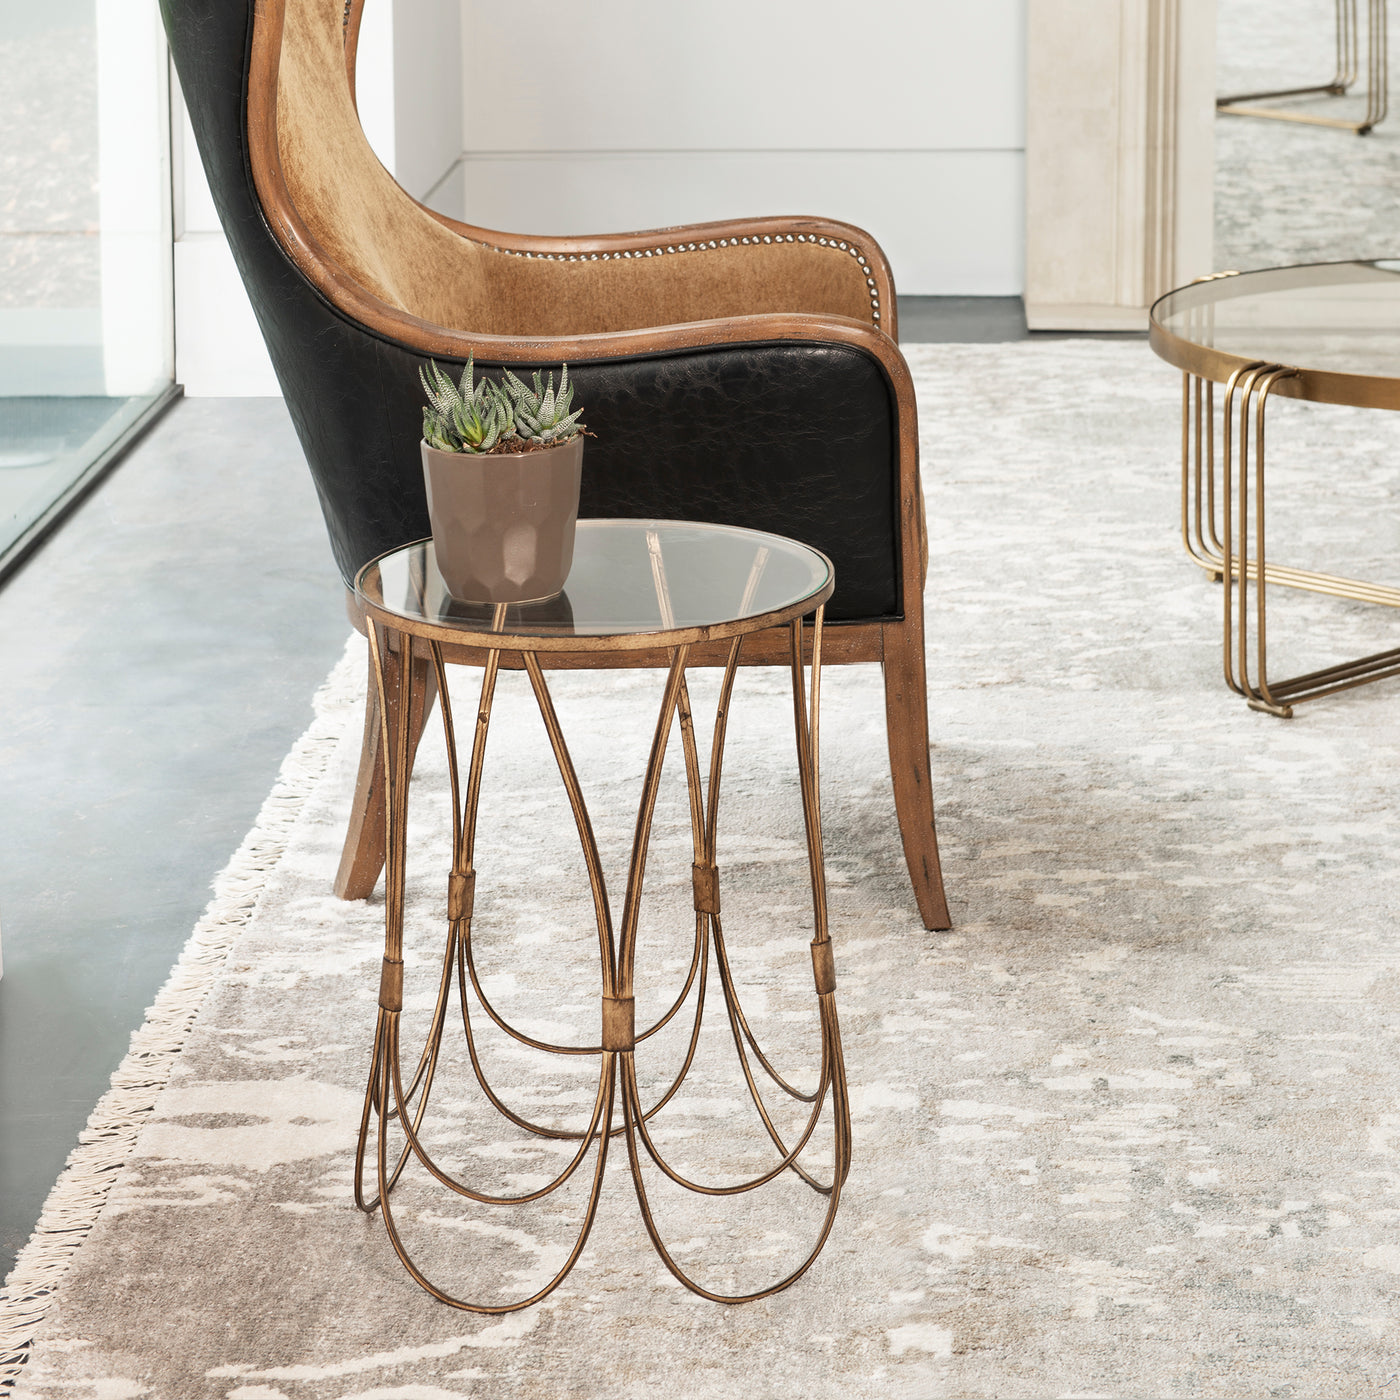 Solidly Constructed From Hand Forged Iron, This Accent Table Showcases Elegantly Curved Lines In An Antique Gold Finish Wi...